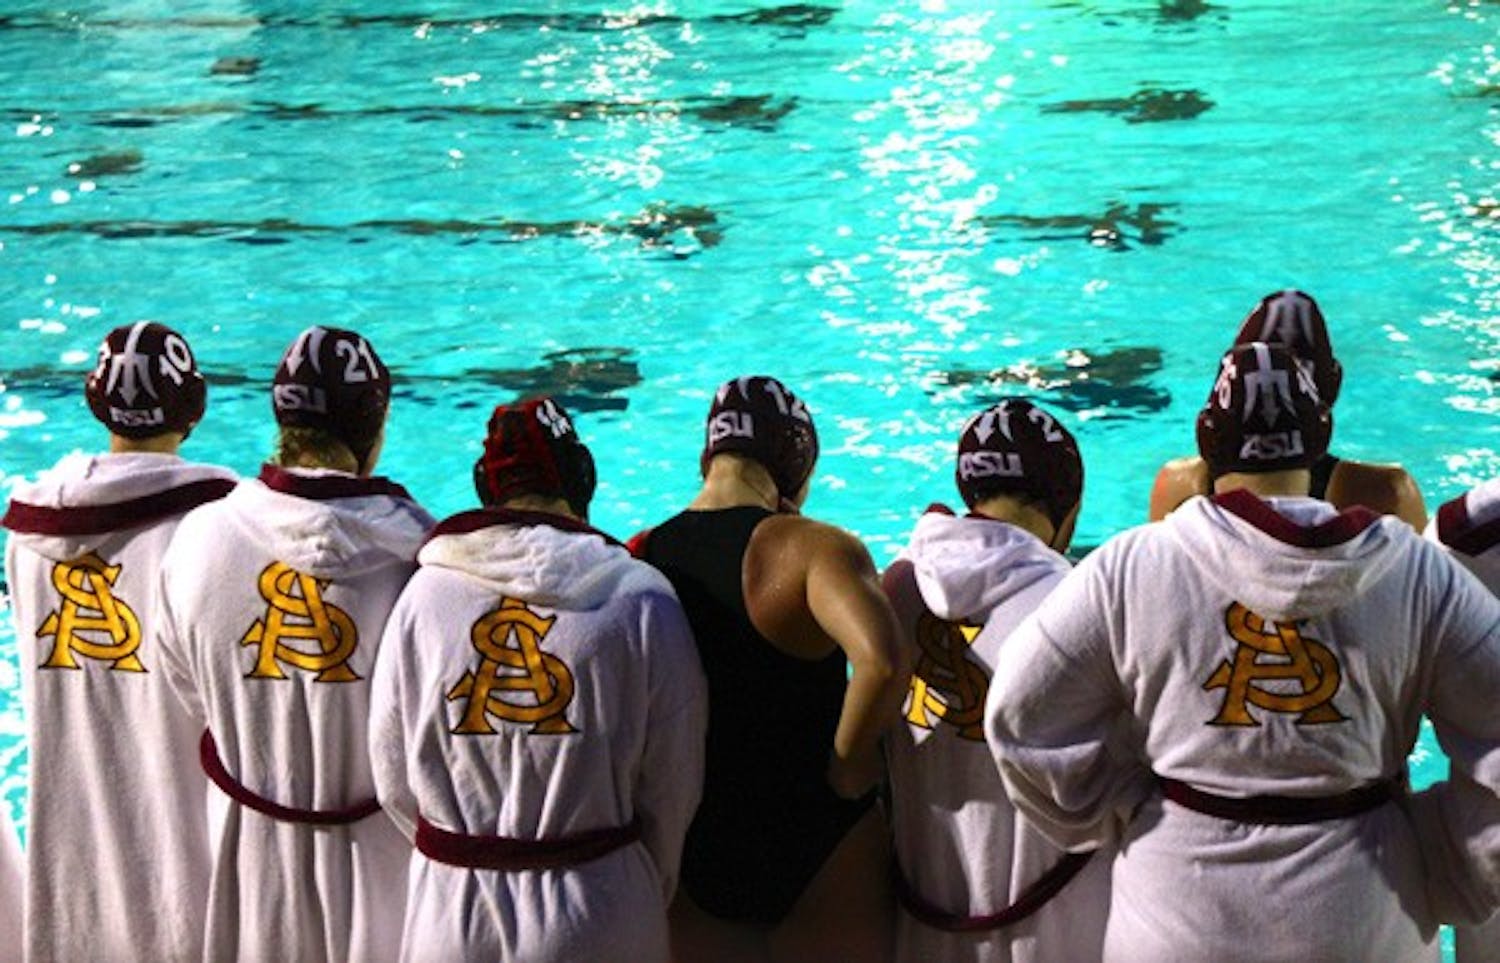 NORTHERN DOMINANCE: Members of the ASU water polo team look on during their 12-5 scrimmage loss against the Canadian National Team. The Sun Devils played well, but were no match for Team Canada, dropping all three games.(Photo by Rosie Gochnour)